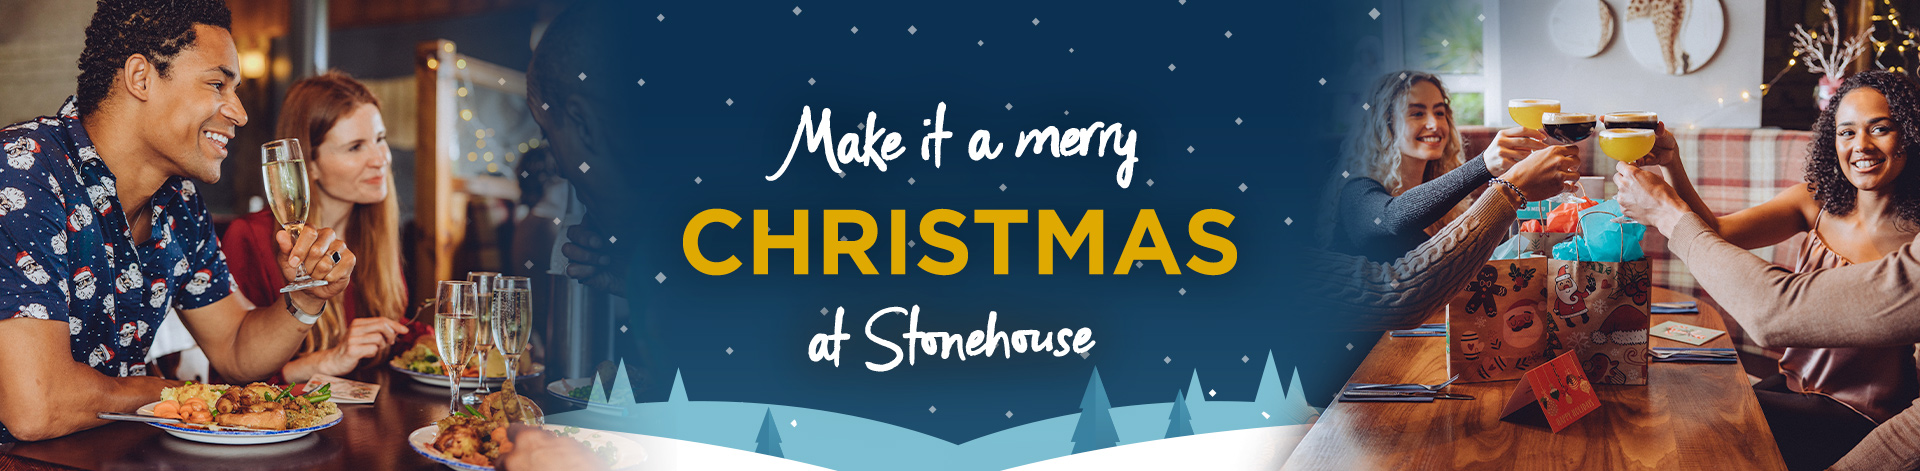 Christmas Parties at Stonehouse